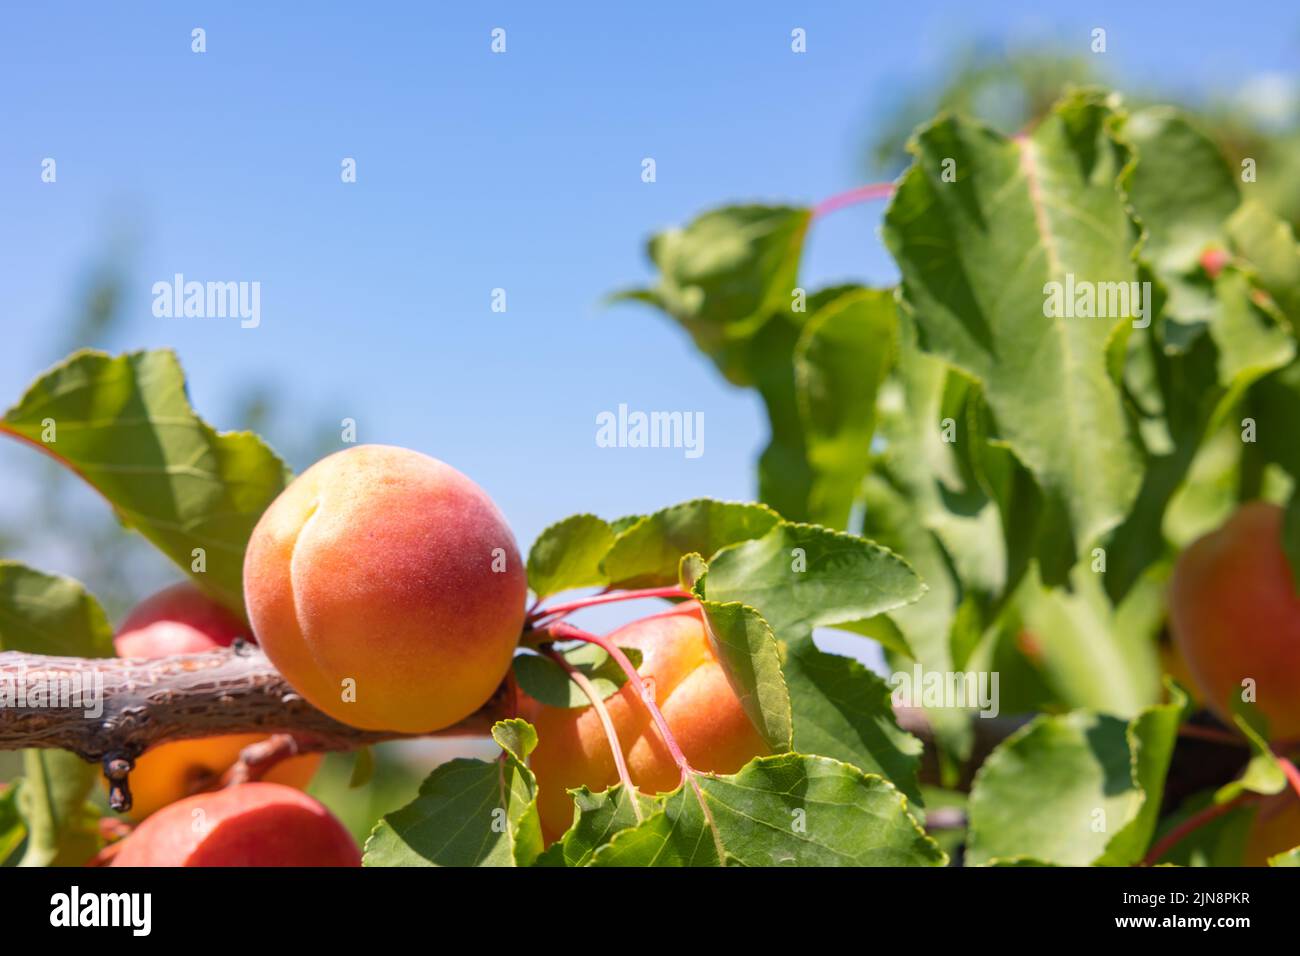 Organic fruit background photo. Apricots on the tree in focus with copy space for text. Stock Photo